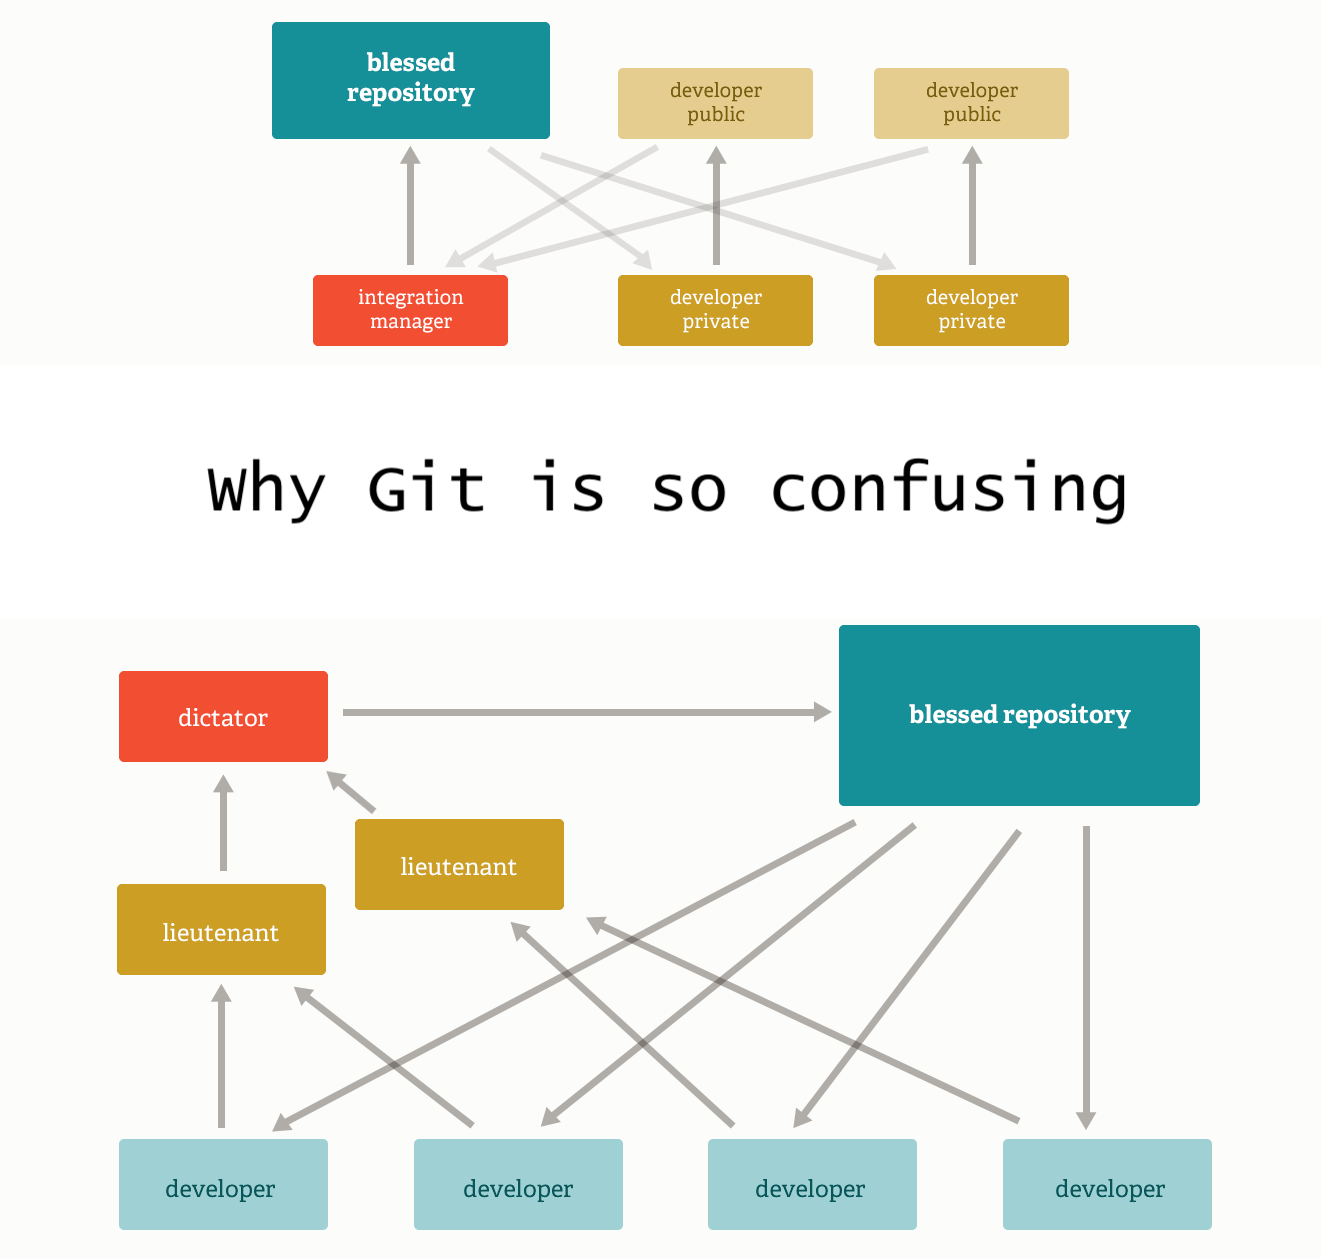 Why Git is so confusing